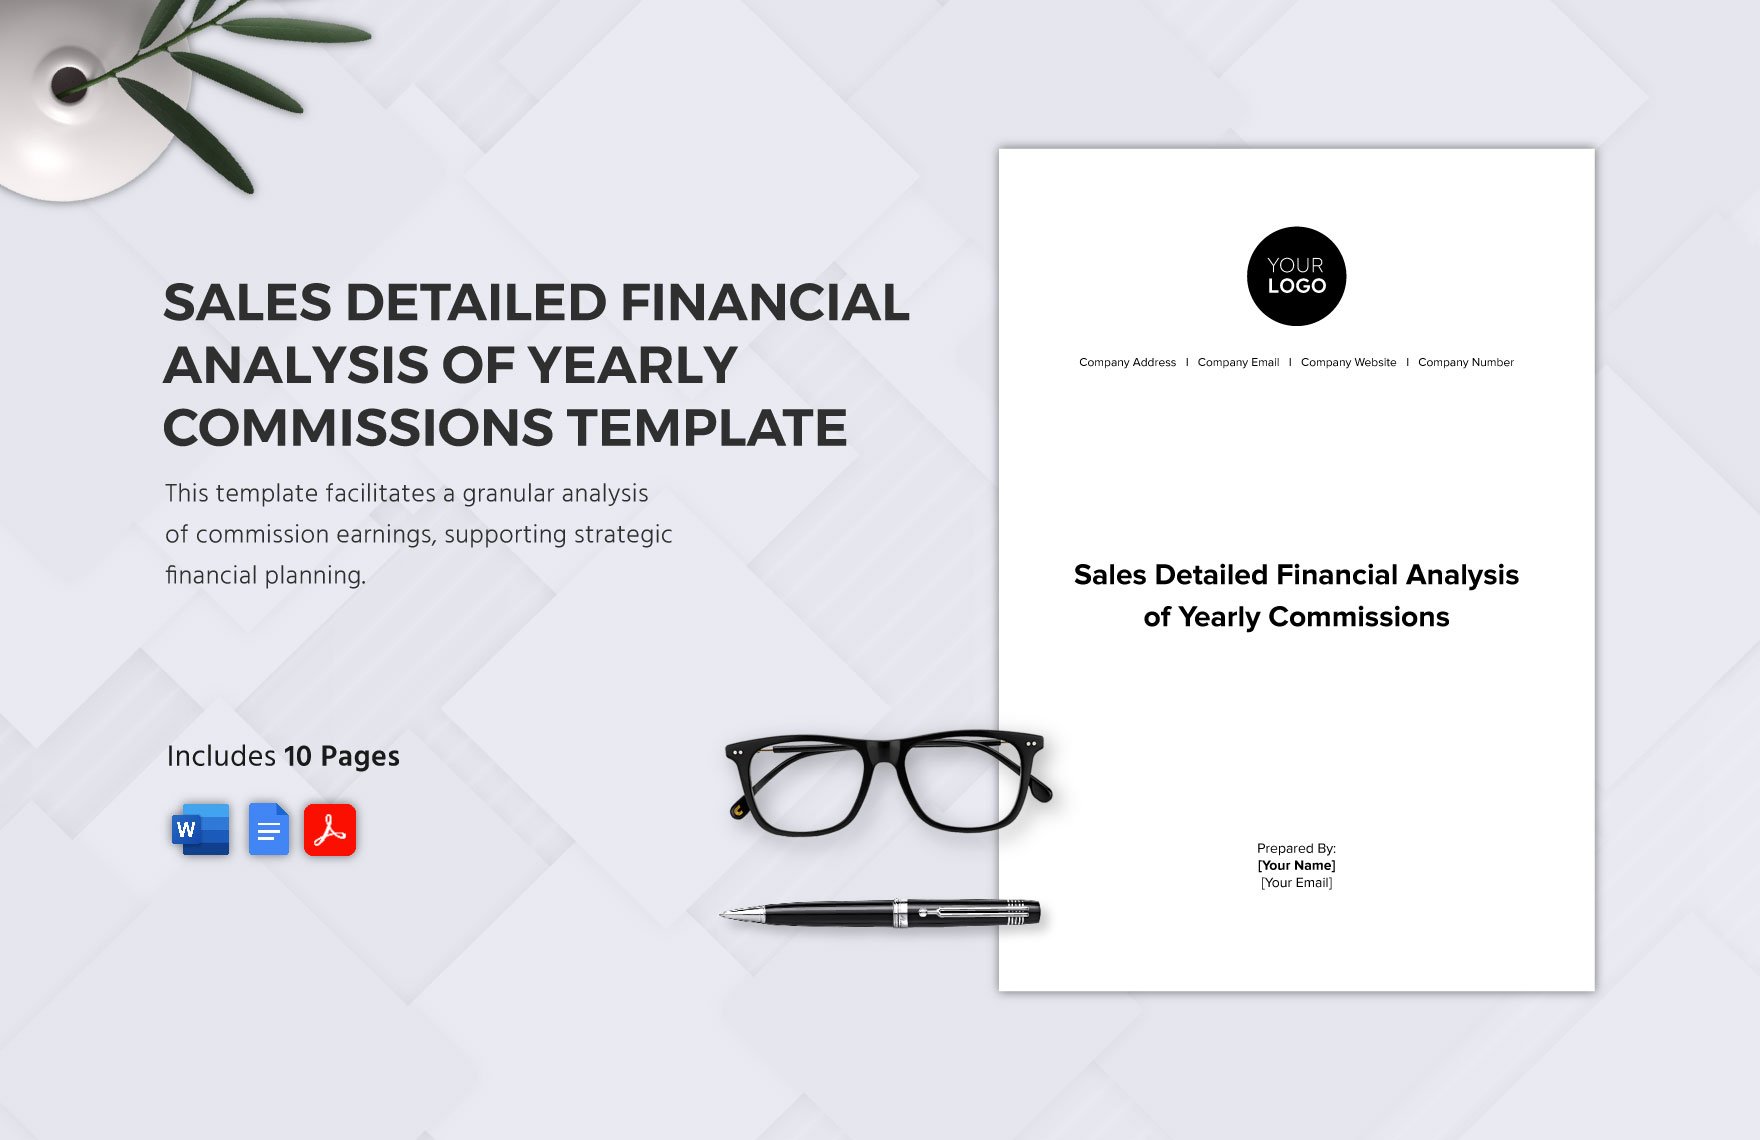 Sales Detailed Financial Analysis of Yearly Commissions Template